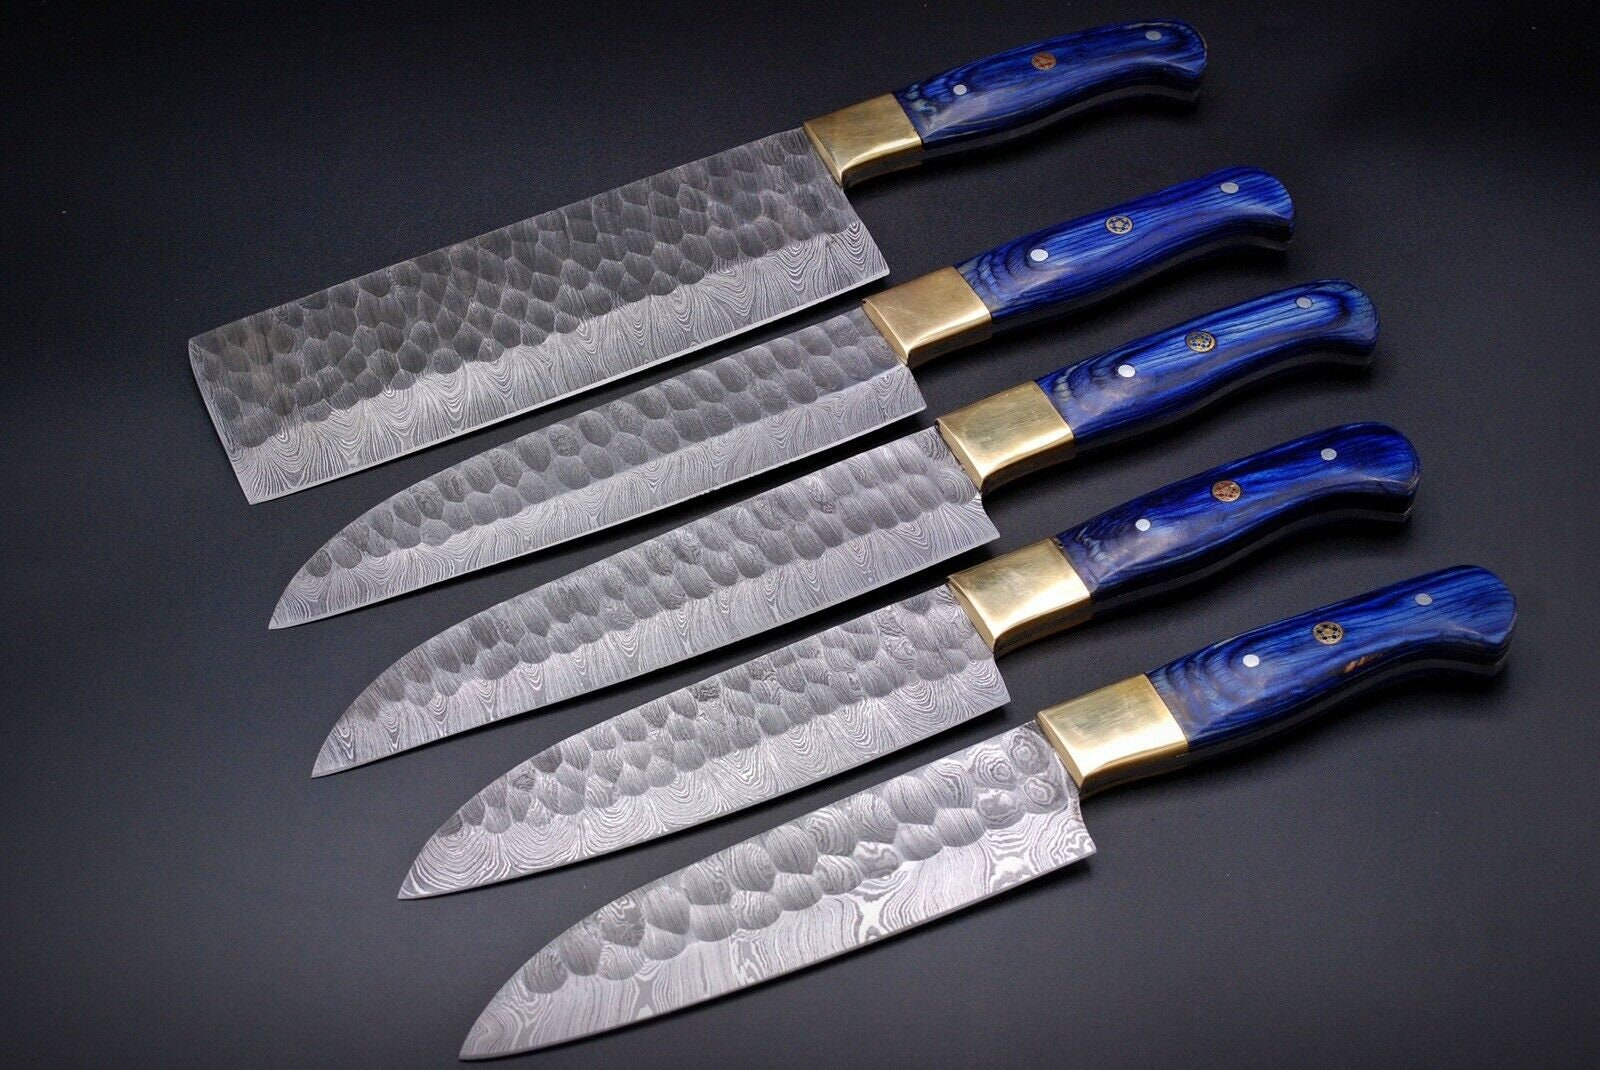 Set of 5 Pcs Hand Forged Damascus steel Chef knife/Kitchen | Etsy